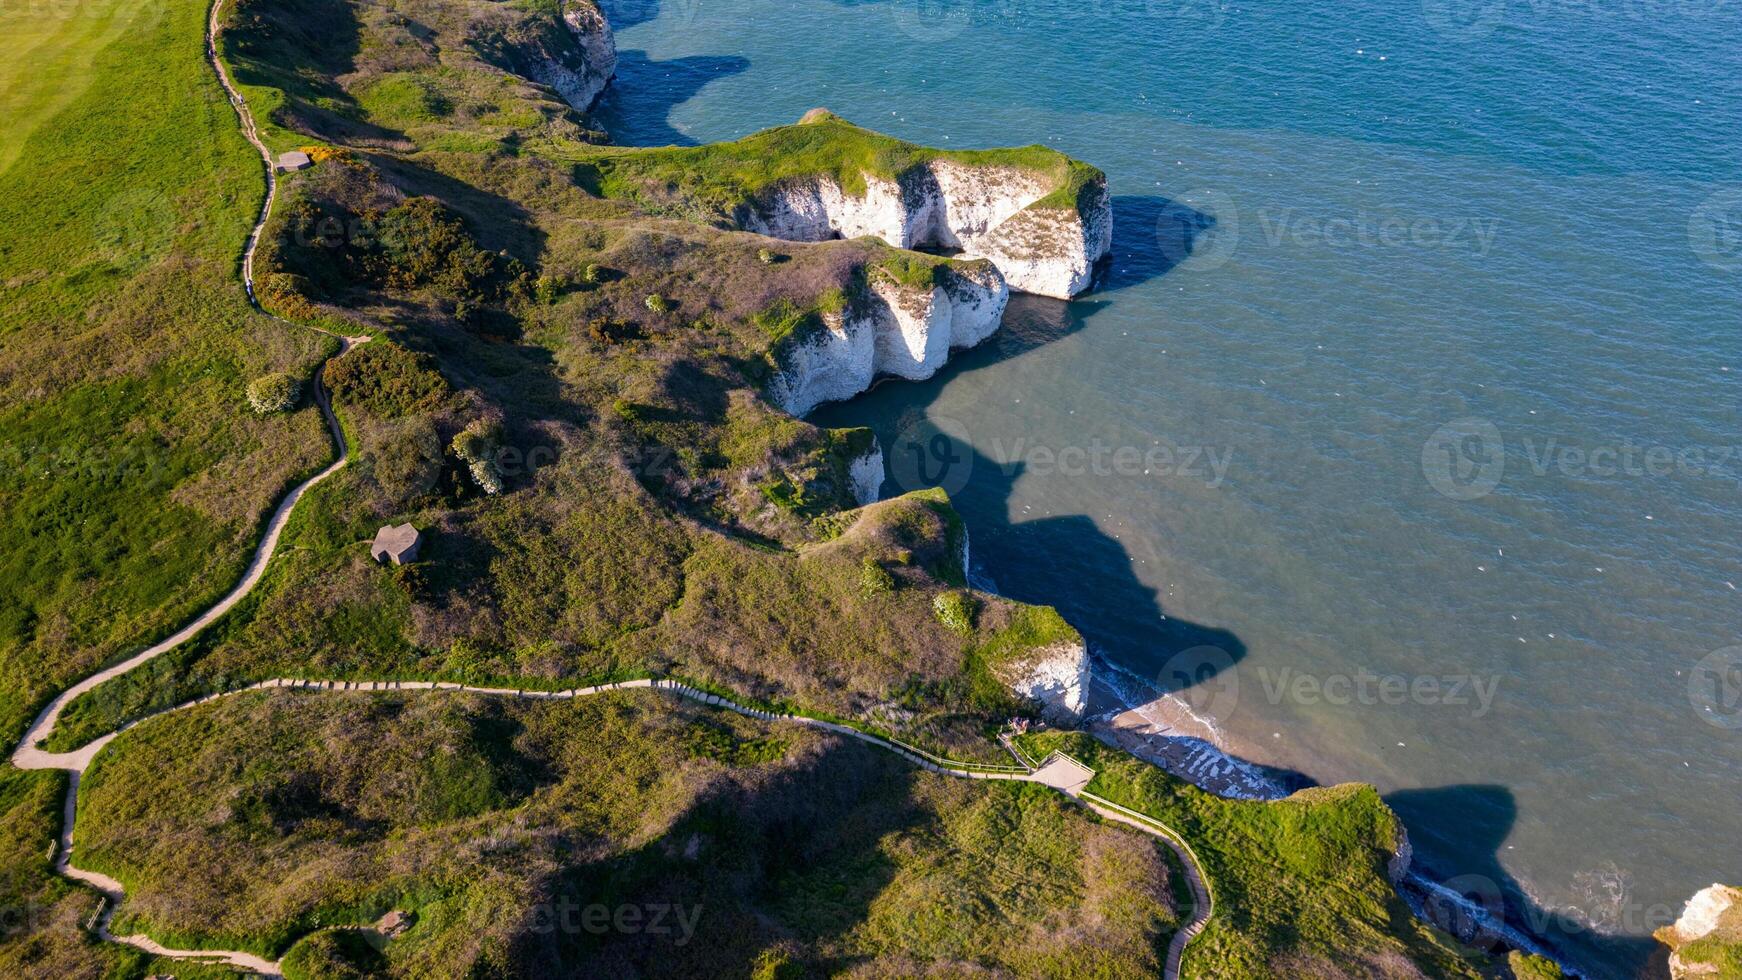 Aerial view of a scenic coastal cliff with greenery and winding paths leading to the beach in Flamborough, England photo